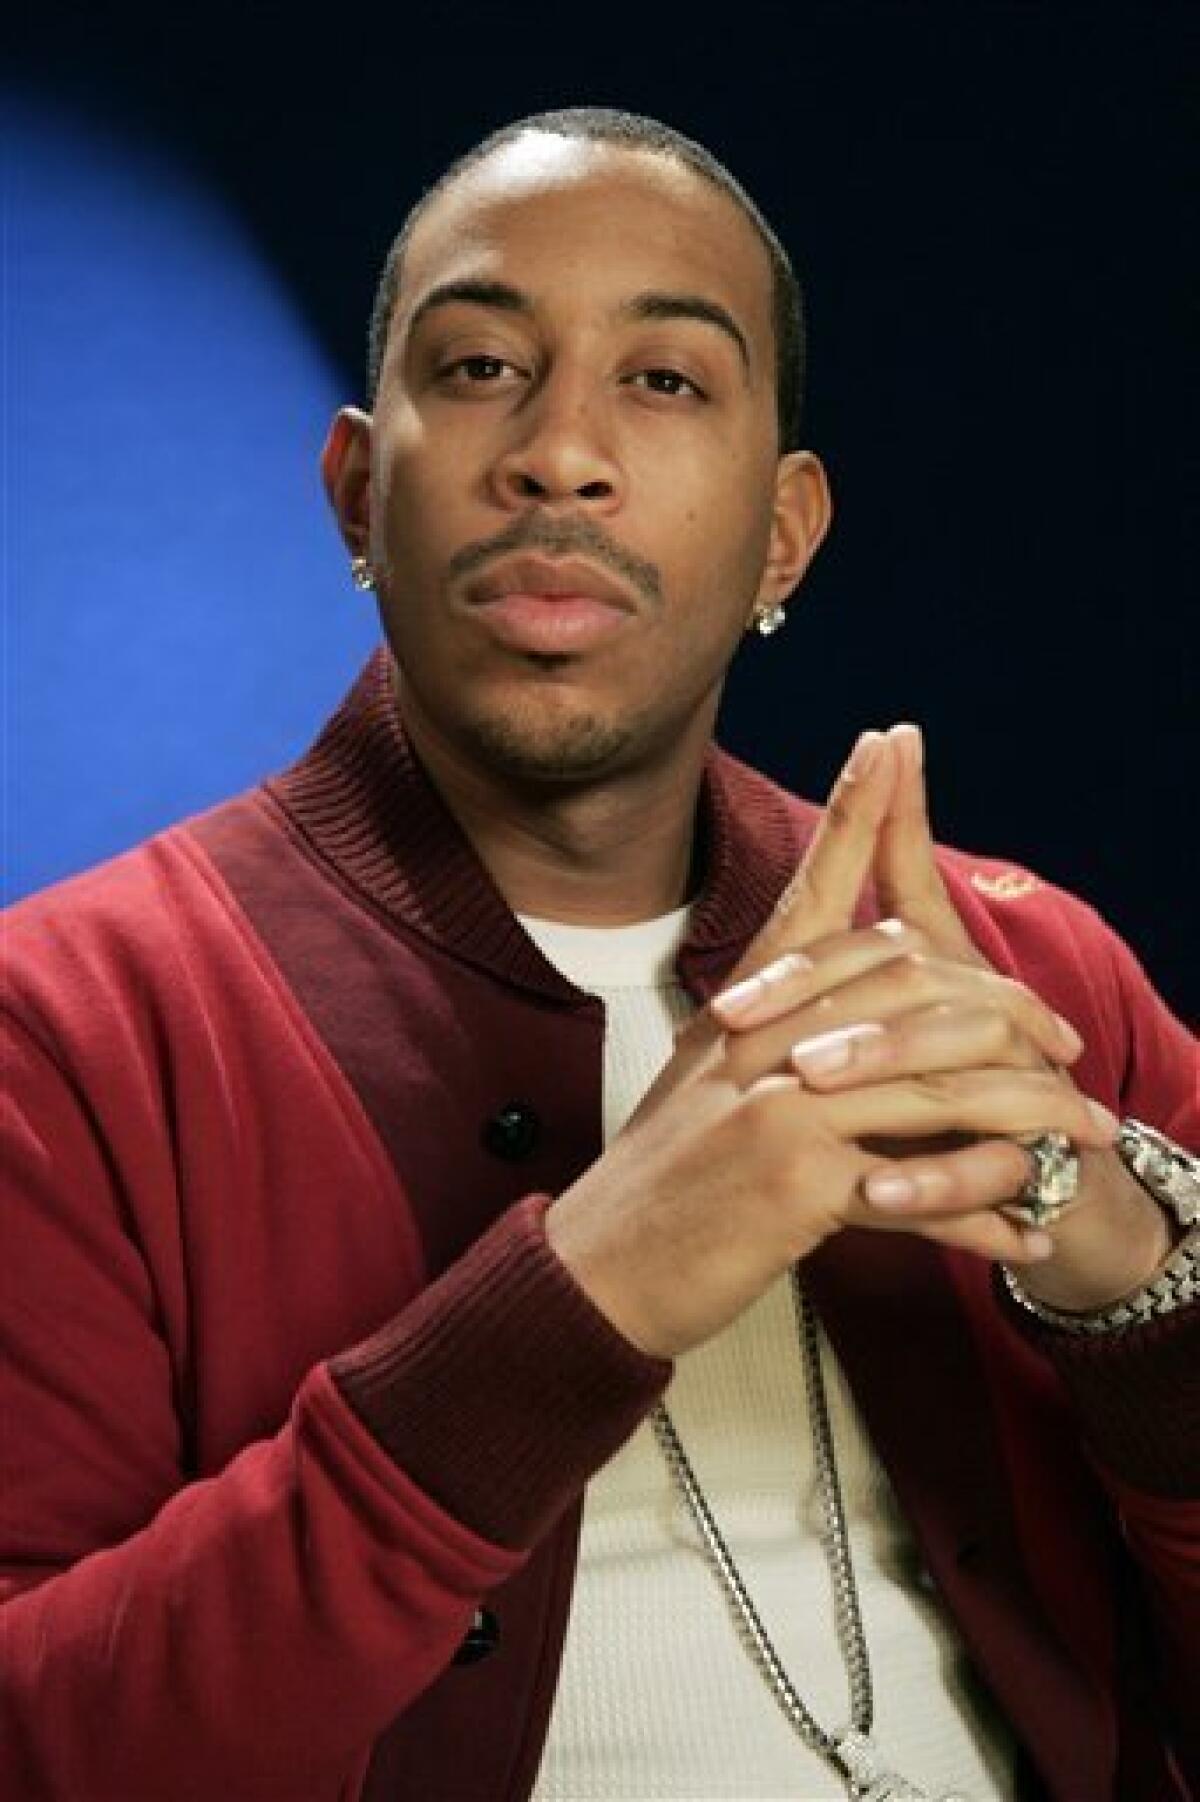 Recording artist Ludacris poses for a portrait in New York, Wednesday, March 10, 2010. (AP Photo/Jeff Christensen)